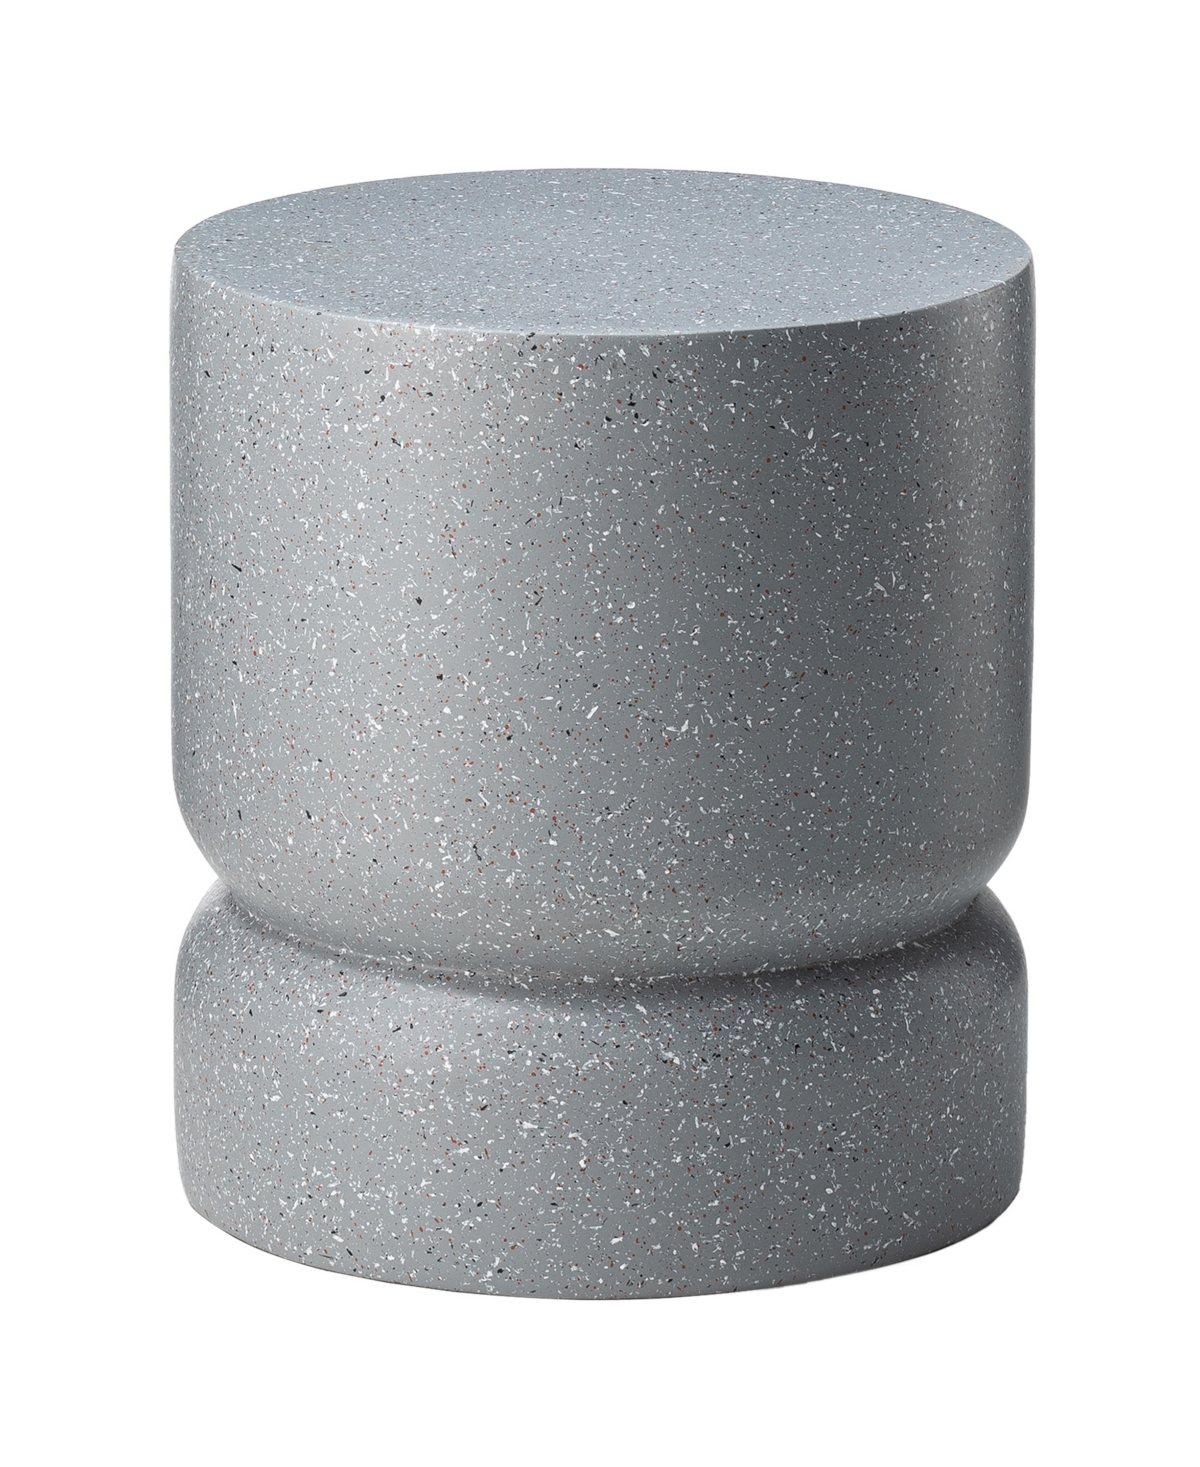 Multi-functional Faux Terrazzo Garden Stool or Planter Stand - Gray